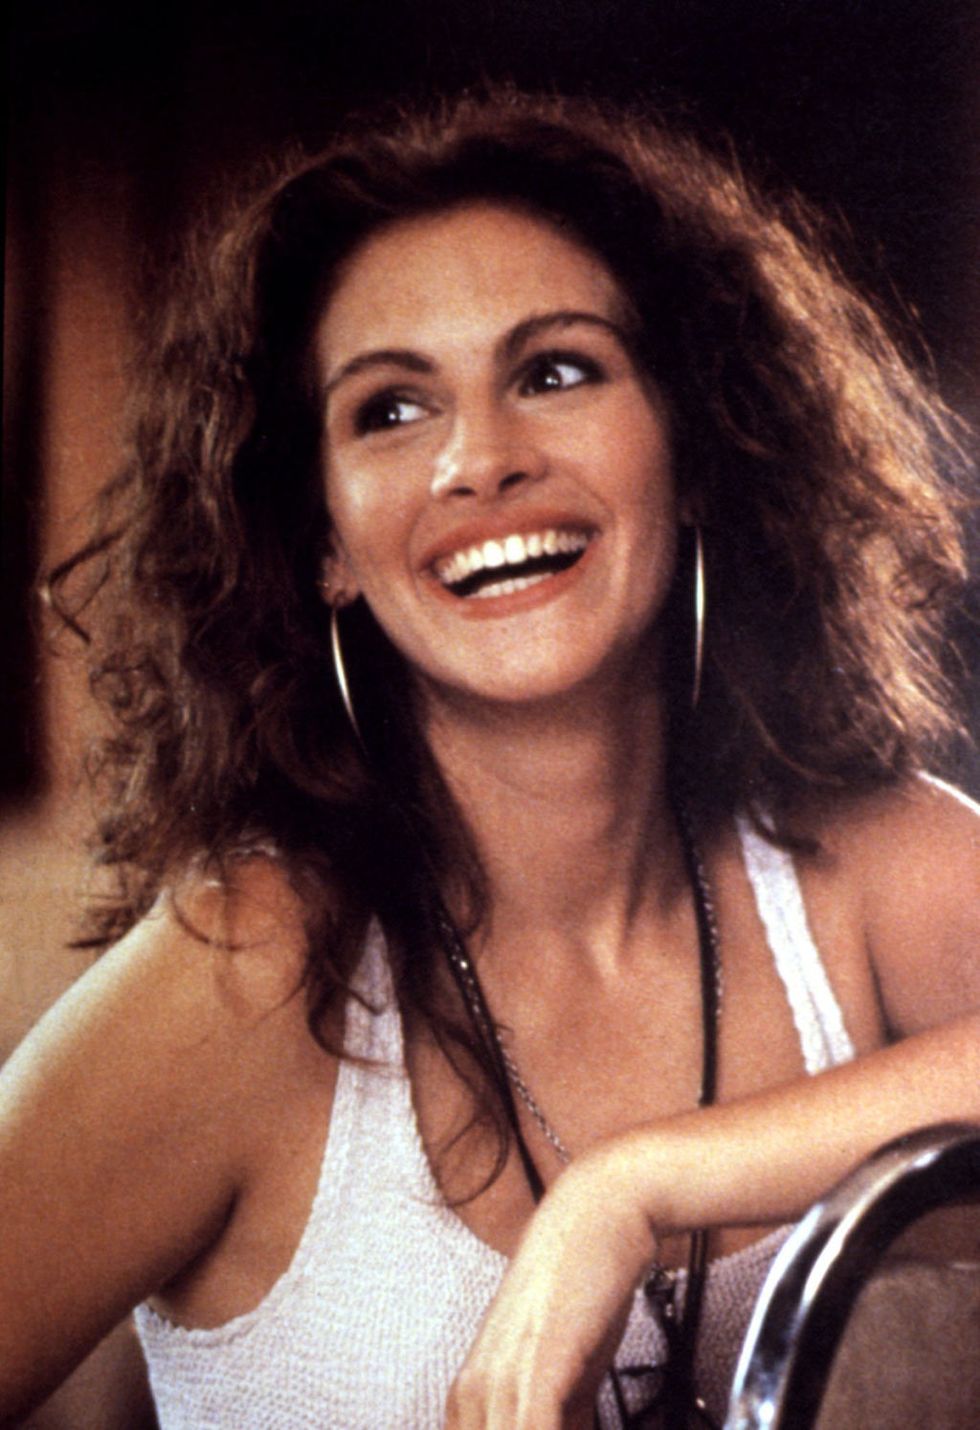 <p>A pile of fluffy red curls became a bonafide sex symbol on Julia Roberts in <em data-redactor-tag="em" data-verified="redactor"><span id="selection-marker-1" class="redactor-selection-marker" data-verified="redactor"></span>Pretty Woman<span id="selection-marker-2" class="redactor-selection-marker" data-verified="redactor"></span></em>.</p>